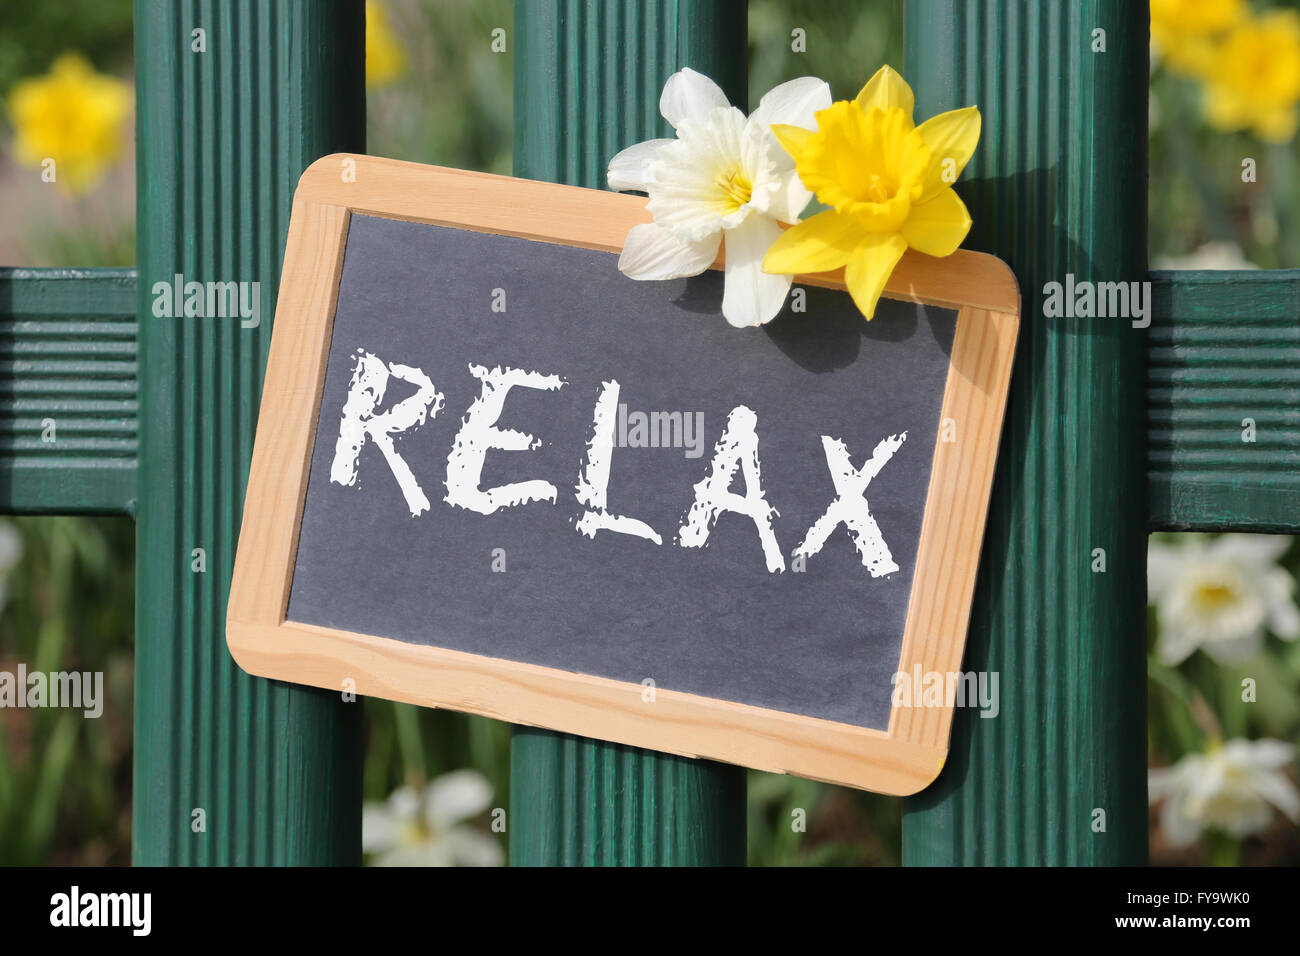 Relax relaxing garden with flowers flower spring sign board on fence Stock Photo